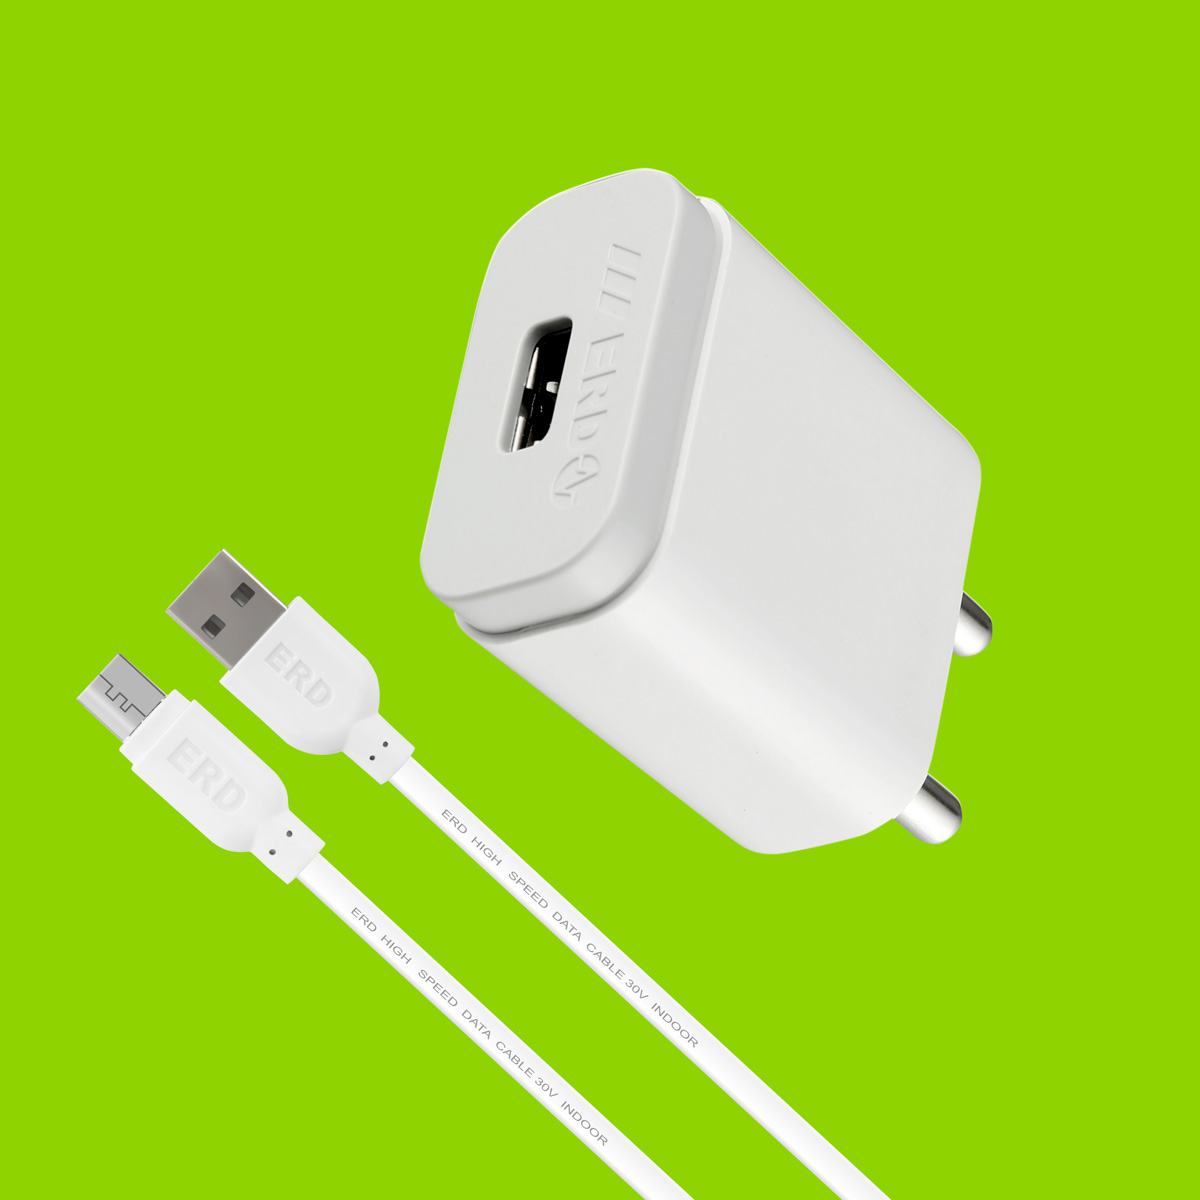 ERD TC-21 Micro USB Charger 2 Amp Mobile Charger with Detachable Cable (White, Cable Included)